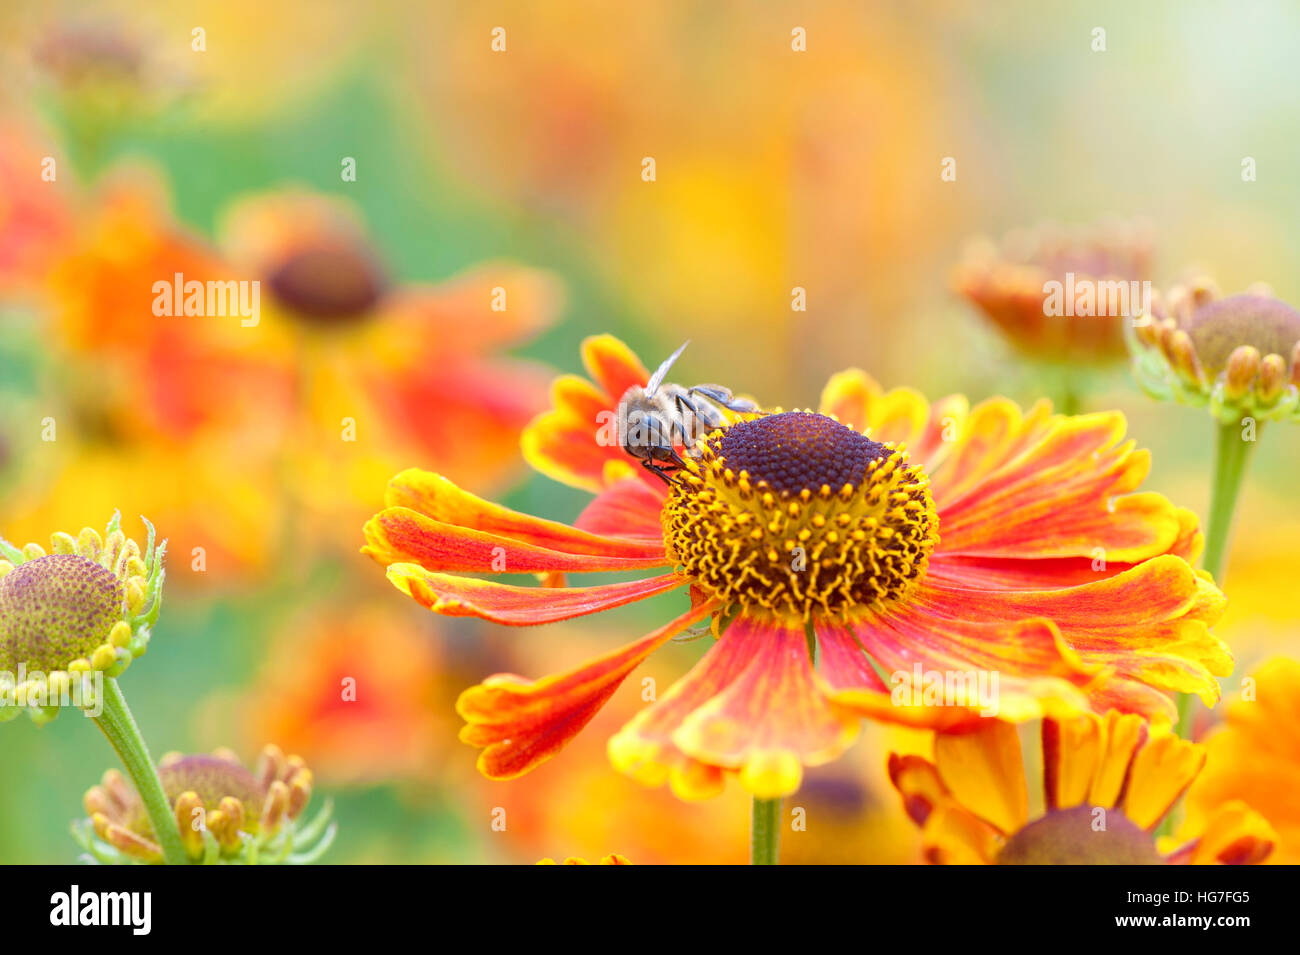 Orange Helenium flower with bee collecting pollen, flowers also known as Sneezeweed Stock Photo